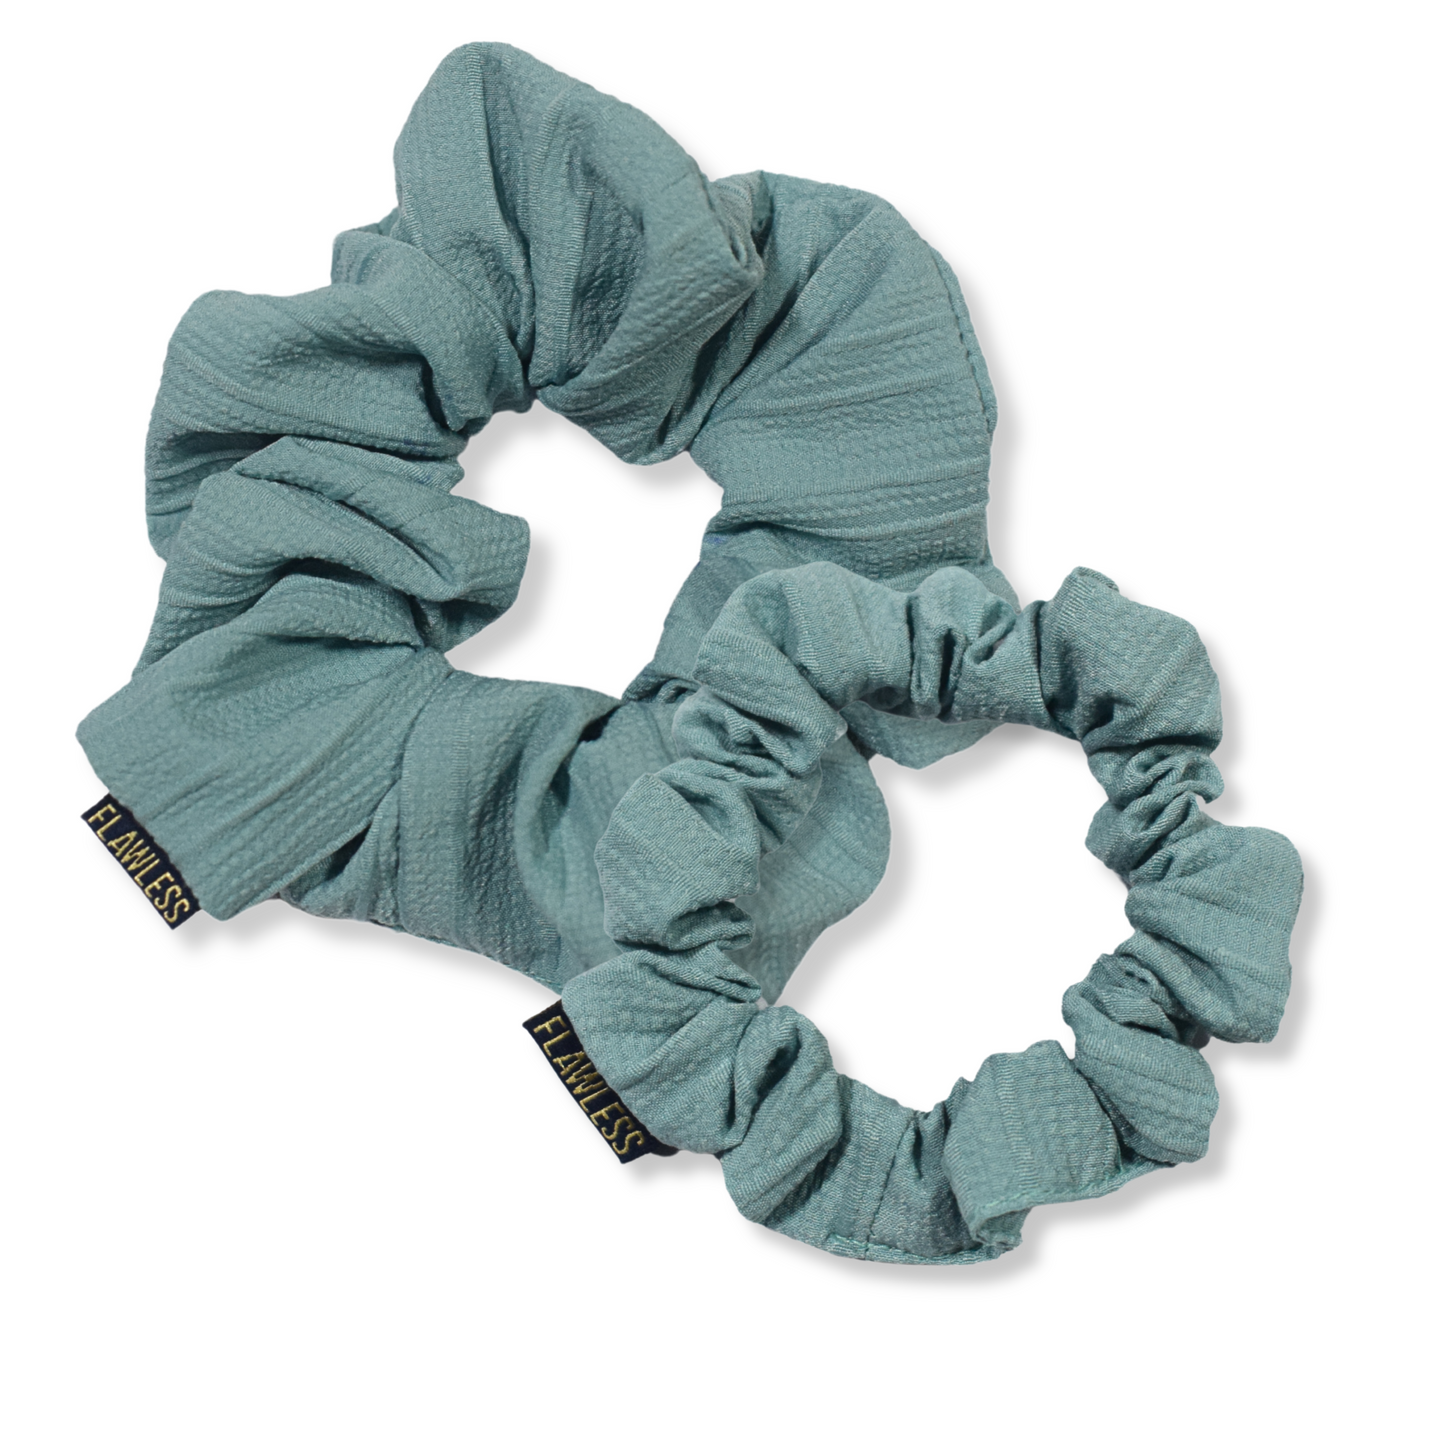 Flawless Soft Sugarcane-Crape Scrunchies -Set of 2 Being Flawless